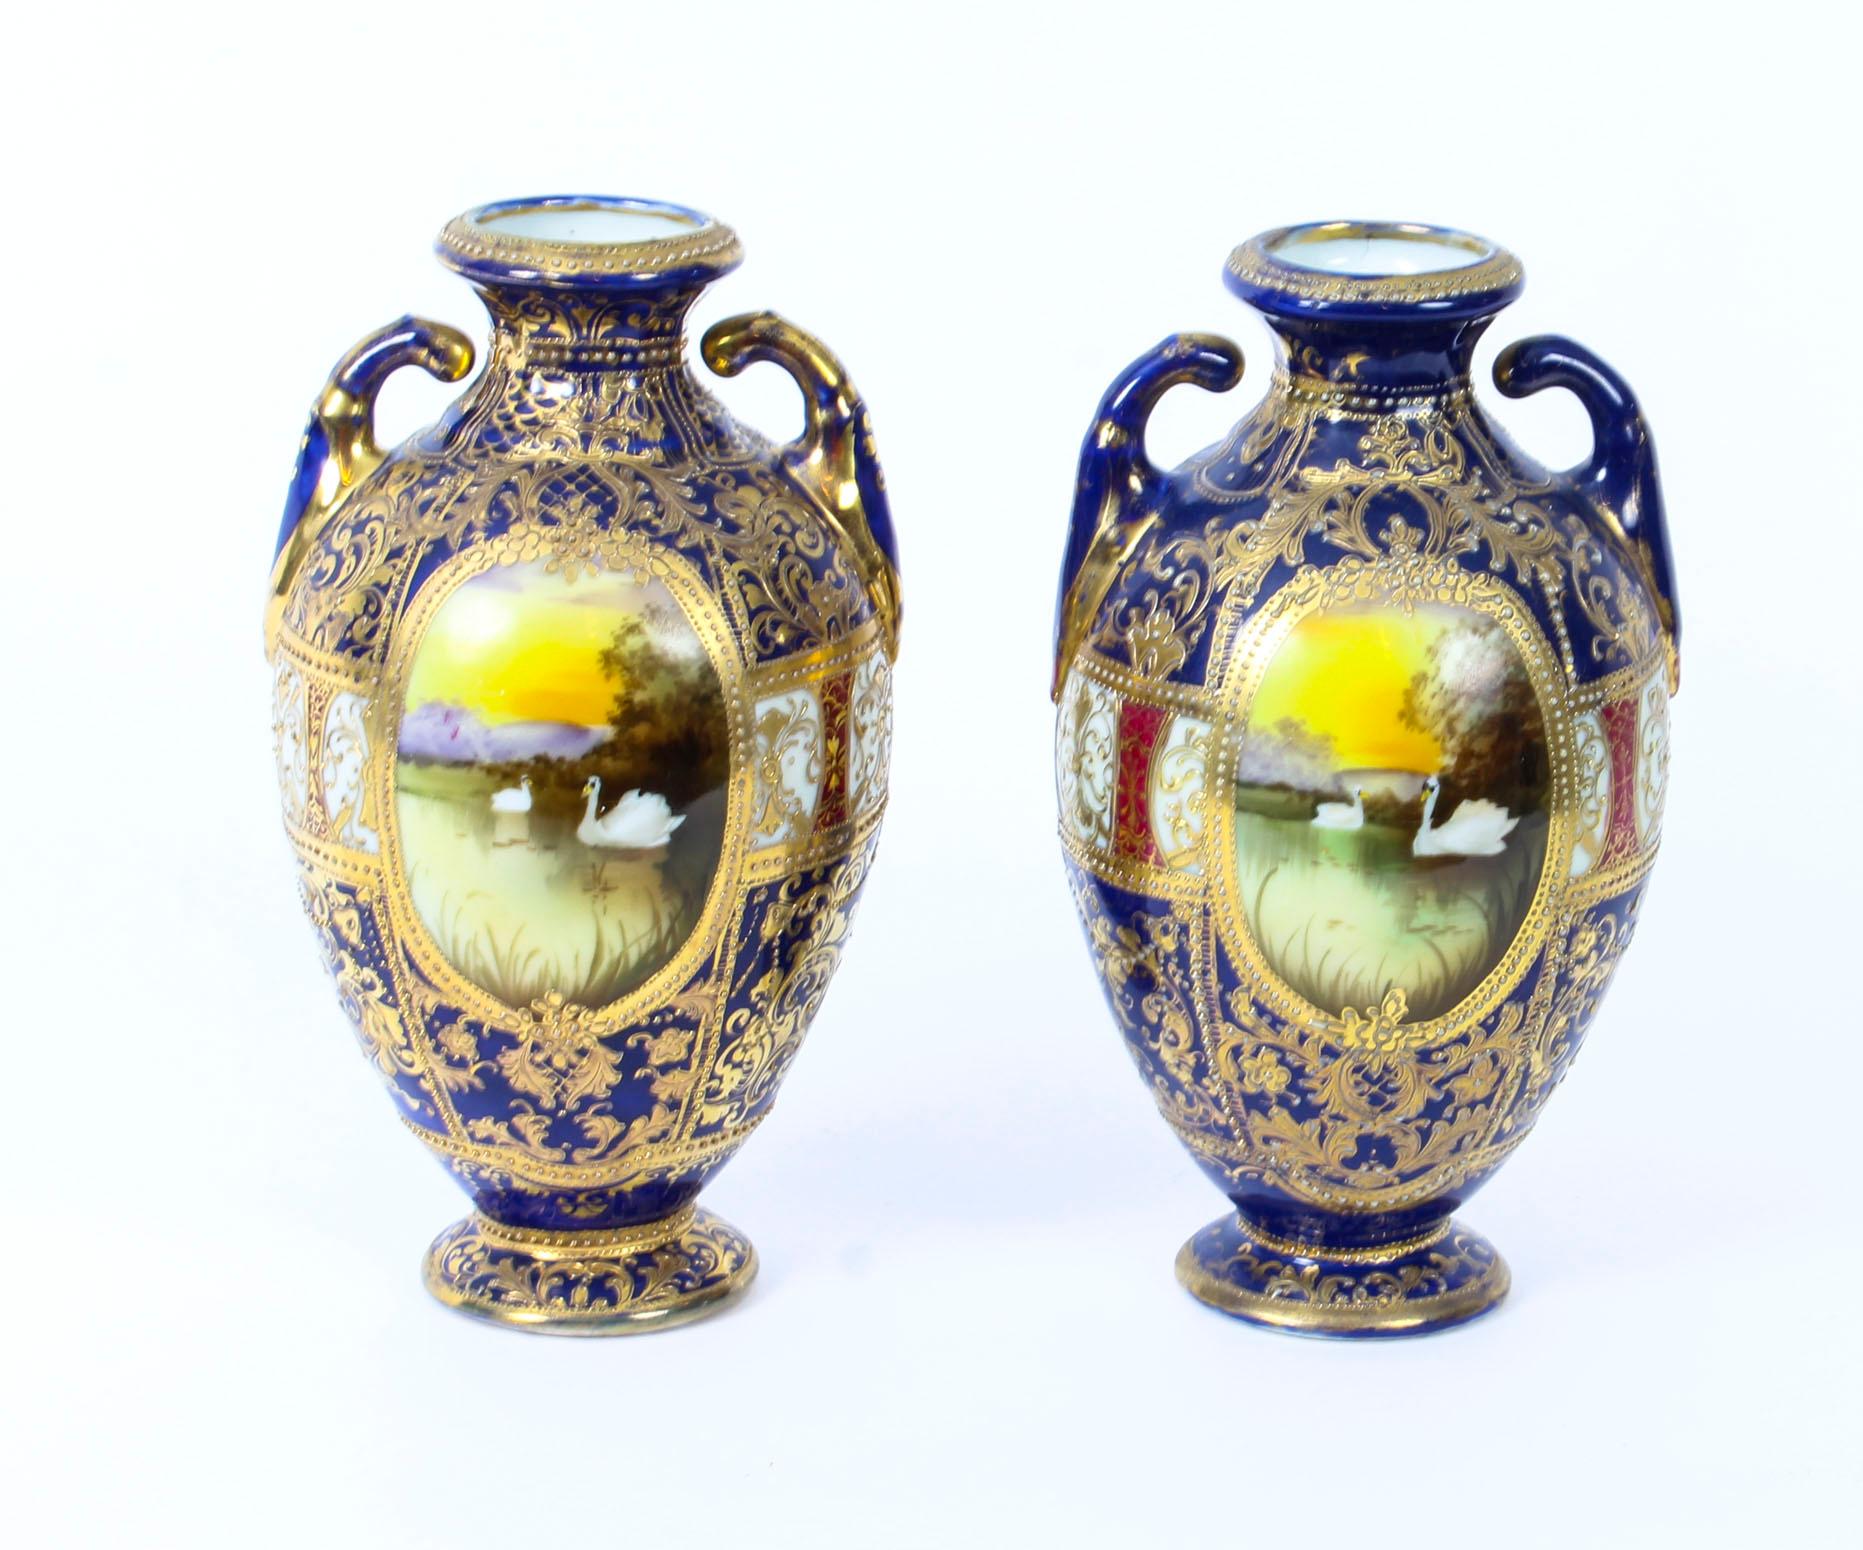 This is a beautiful antique pair of Taisho Period hand painted twin handled Noritake porcelain vases painted with swans, circa 1920 in date.

They feature attractive multi coloured floral patterns with a dominant navy blue background. 

Instill